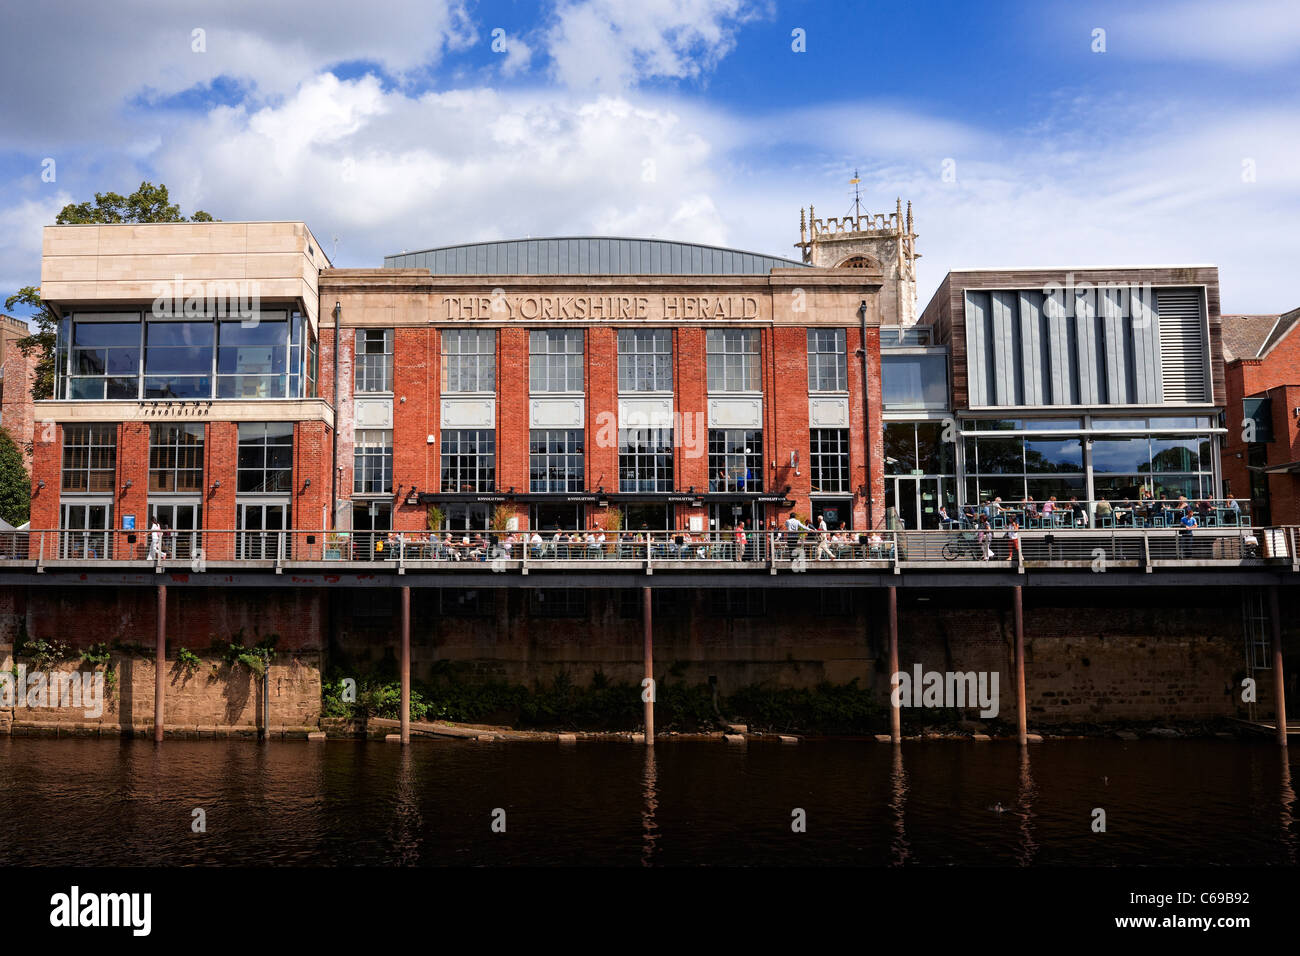 York city centre, former Yorkshire Herald building now used as a cinema, waterfront restaurant and bar Stock Photo